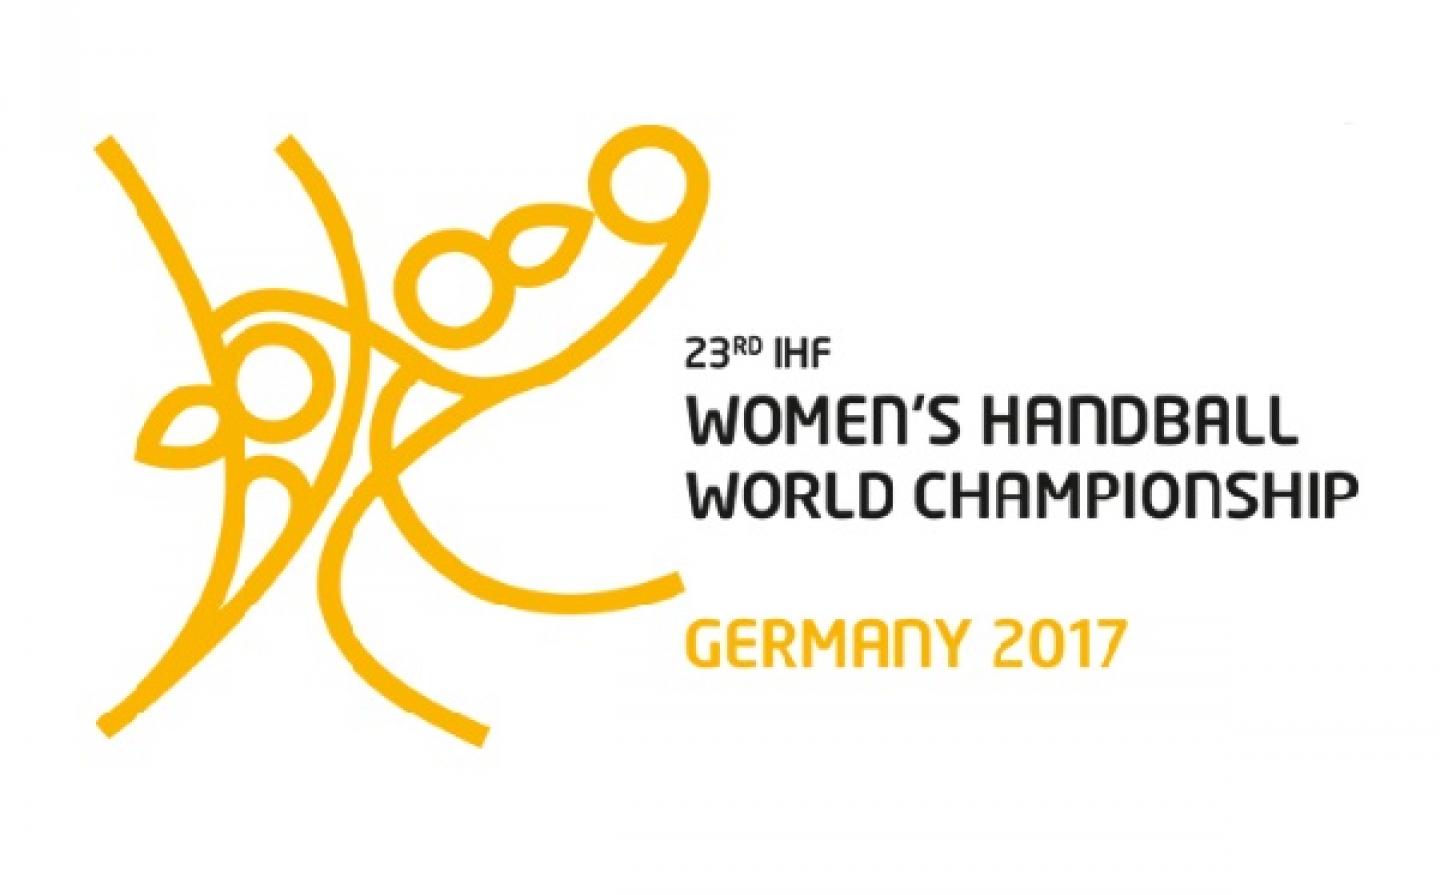 Referee couples nominated for Germany 2017